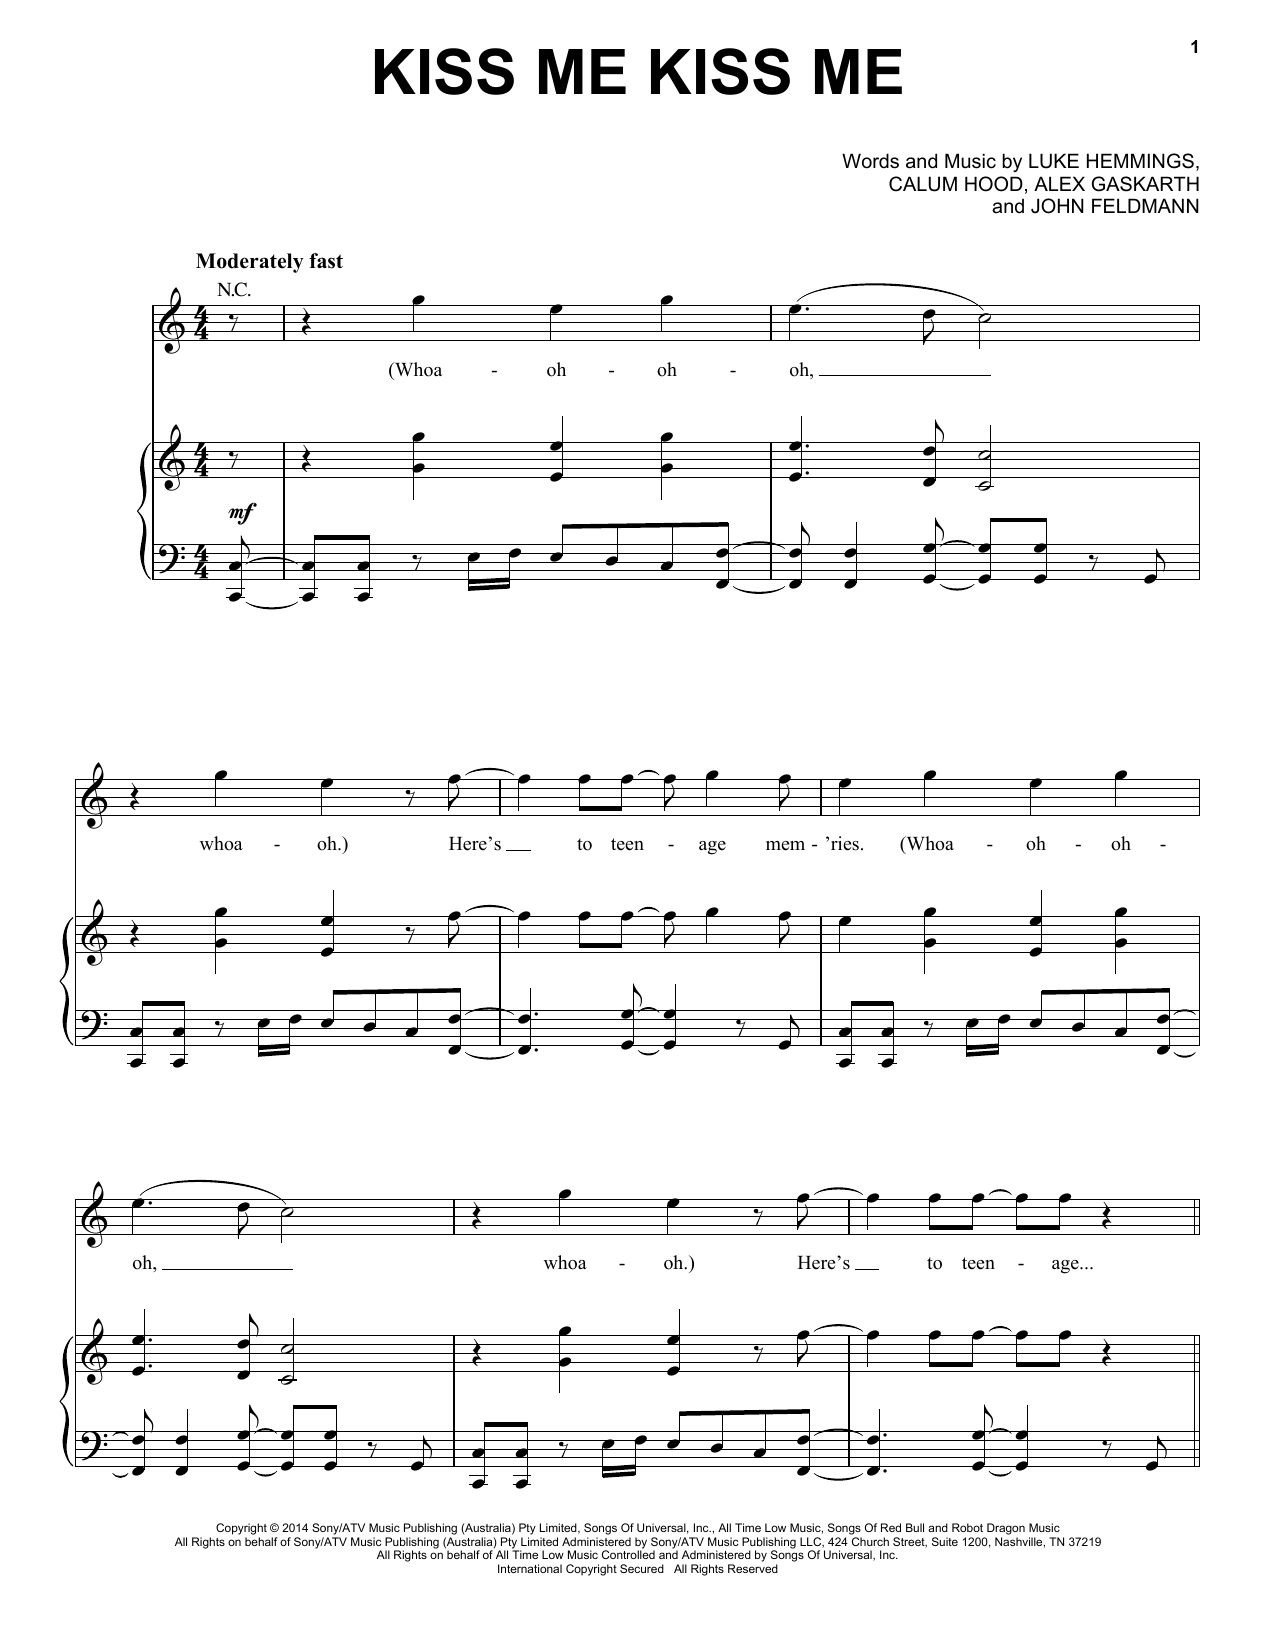 Download 5 Seconds of Summer Kiss Me Kiss Me Sheet Music